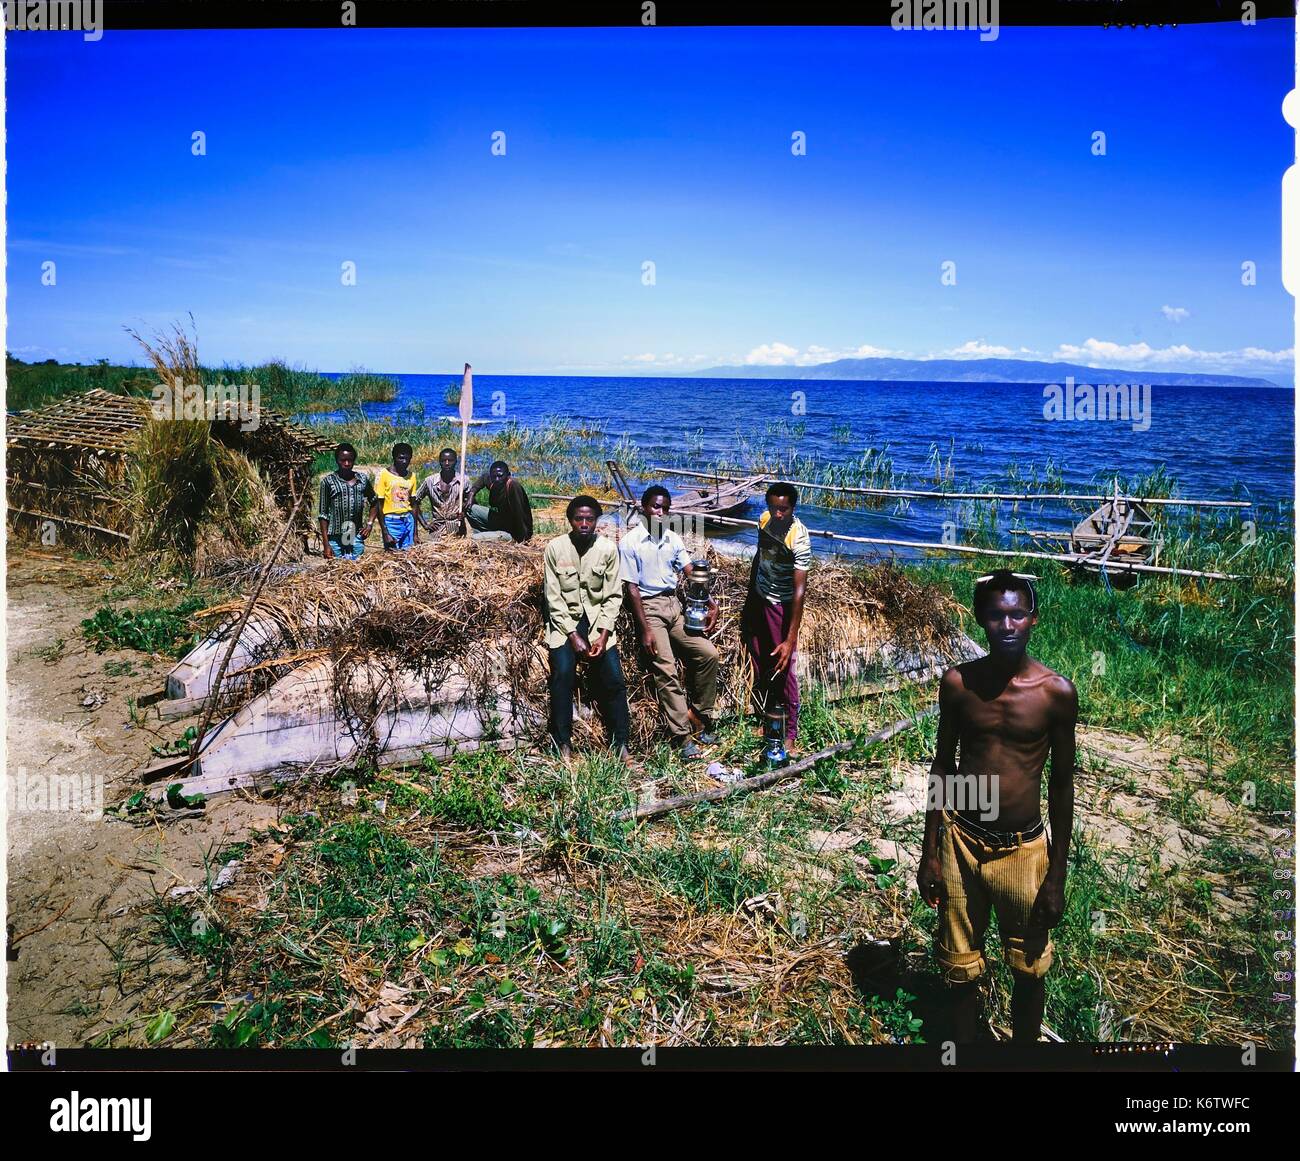 Burundi, Rumonge Province, group of fishermen on Lake Tanganyika, fishermen are exclusively Hutu and come down from the hills to settle in temporary huts for at least 6 months, fishing is generally done at night with lampara and it's mainly ndagalas (fried fish) mukekes and Lates niloticus (4x5 reversal film reproduction) Stock Photo